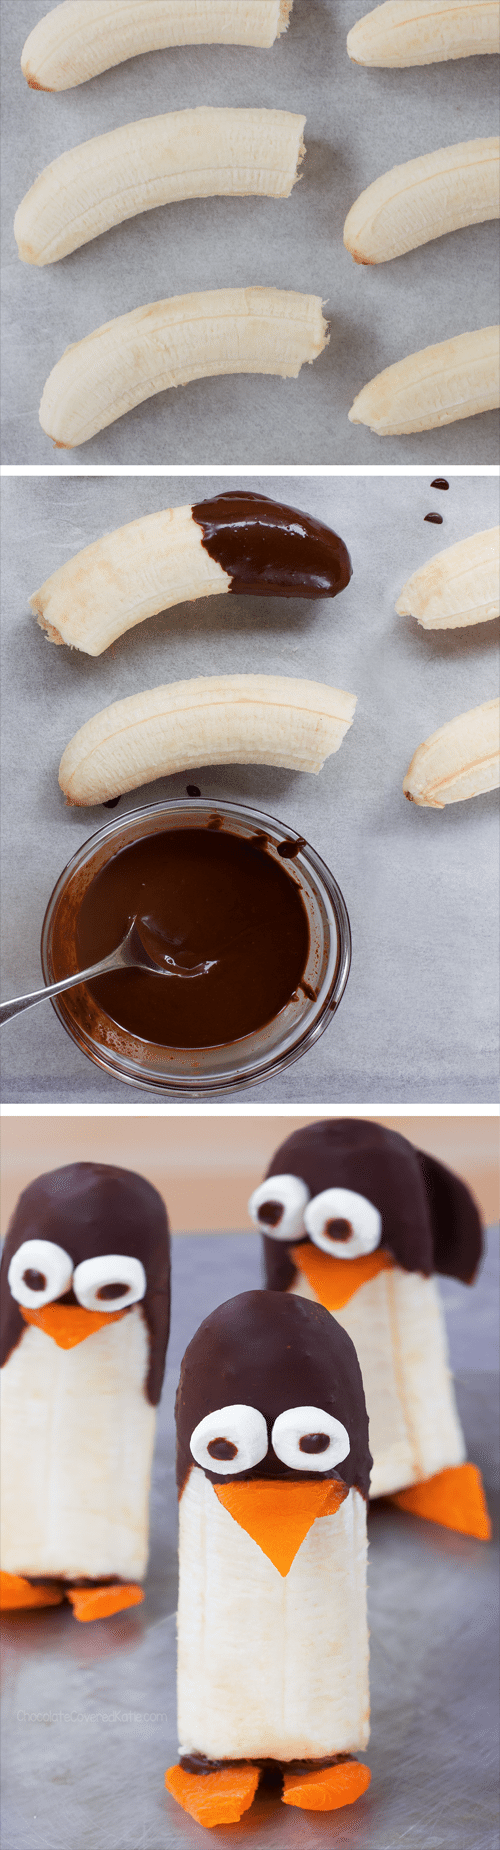 Peel the bananas, dip in melted chocolate, then use the... full recipe instructions: https://chocolatecoveredkatie.com @choccoveredkt